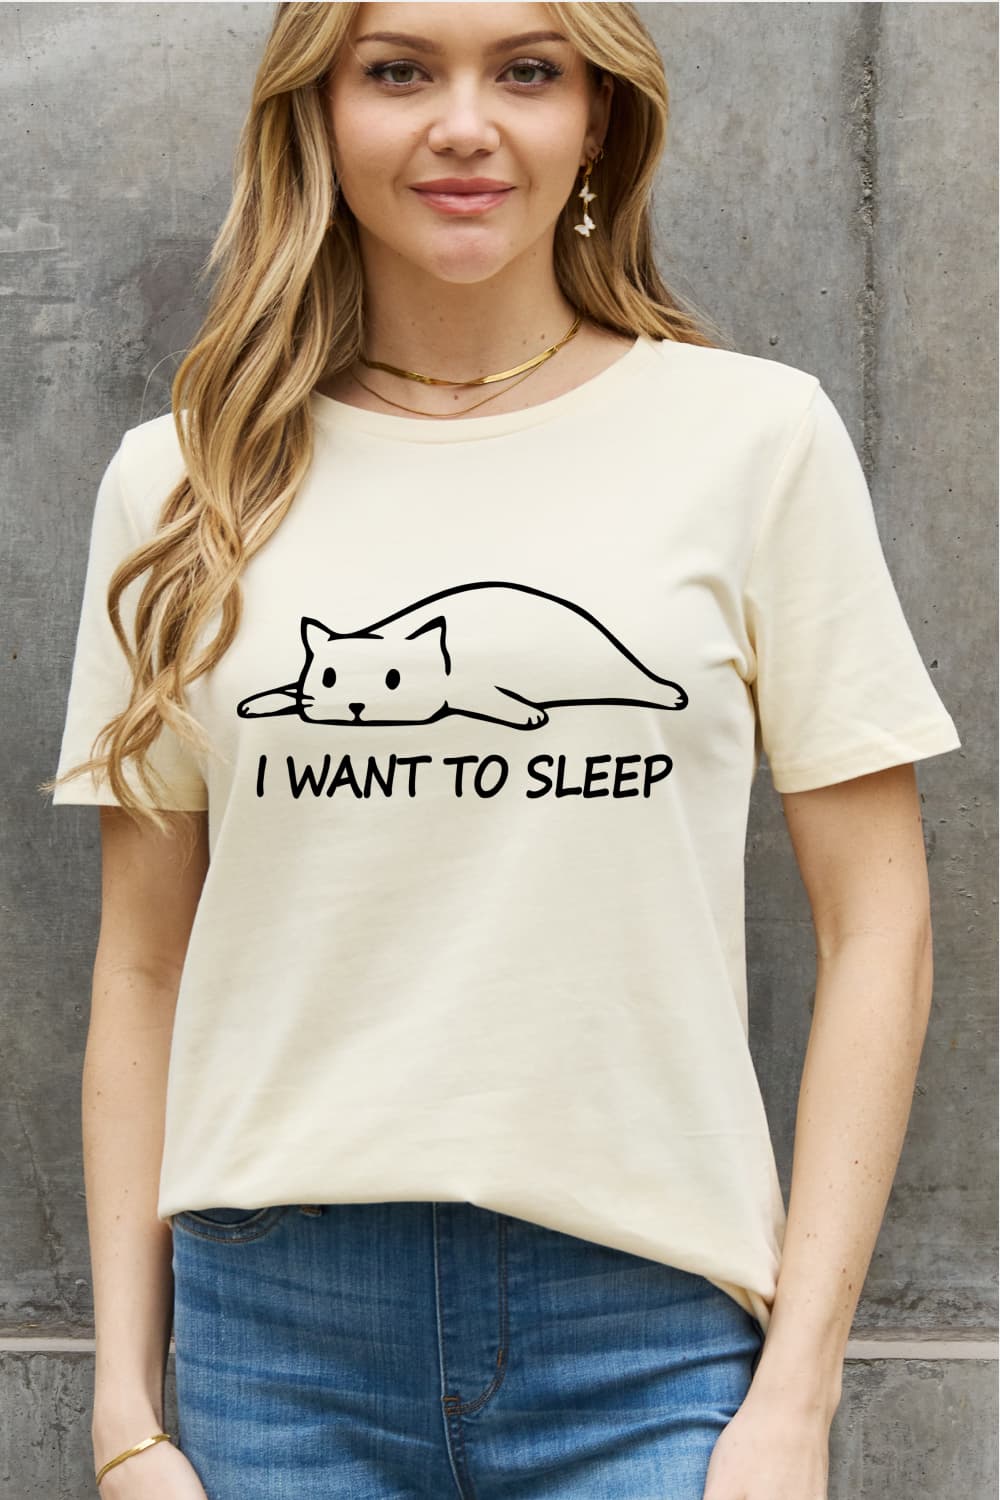 Rosy Brown Simply Love Full Size I WANT TO SLEEP Graphic Cotton Tee Sentient Beauty Fashions Apparel & Accessories